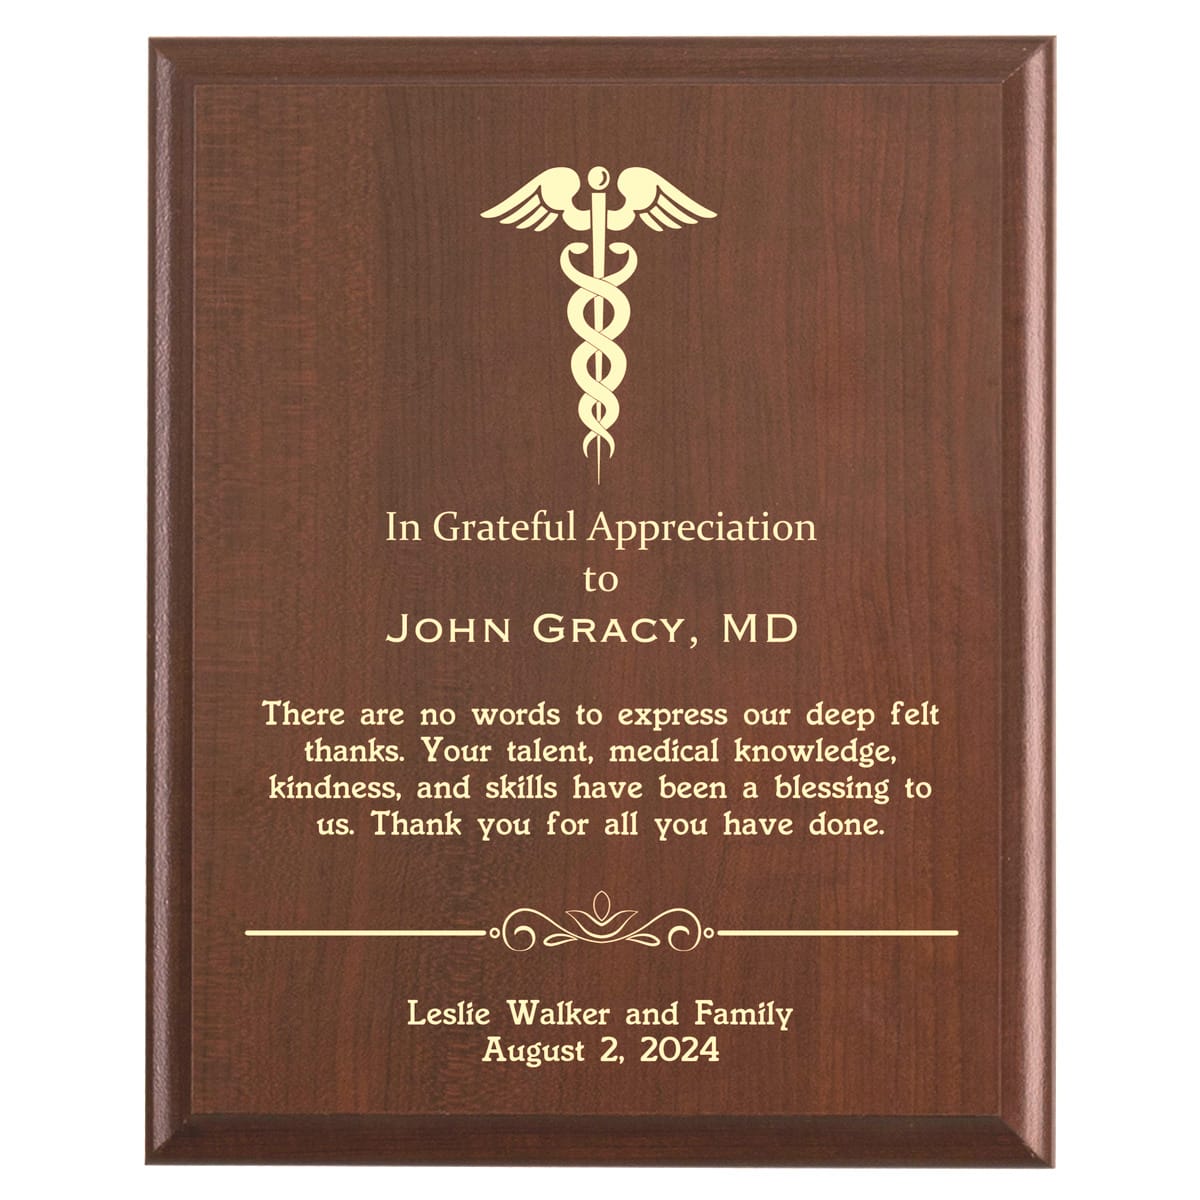 Plaque photo: Surgeon Thank You Appreciation Plaque design with free personalization. Wood style finish with customized text.